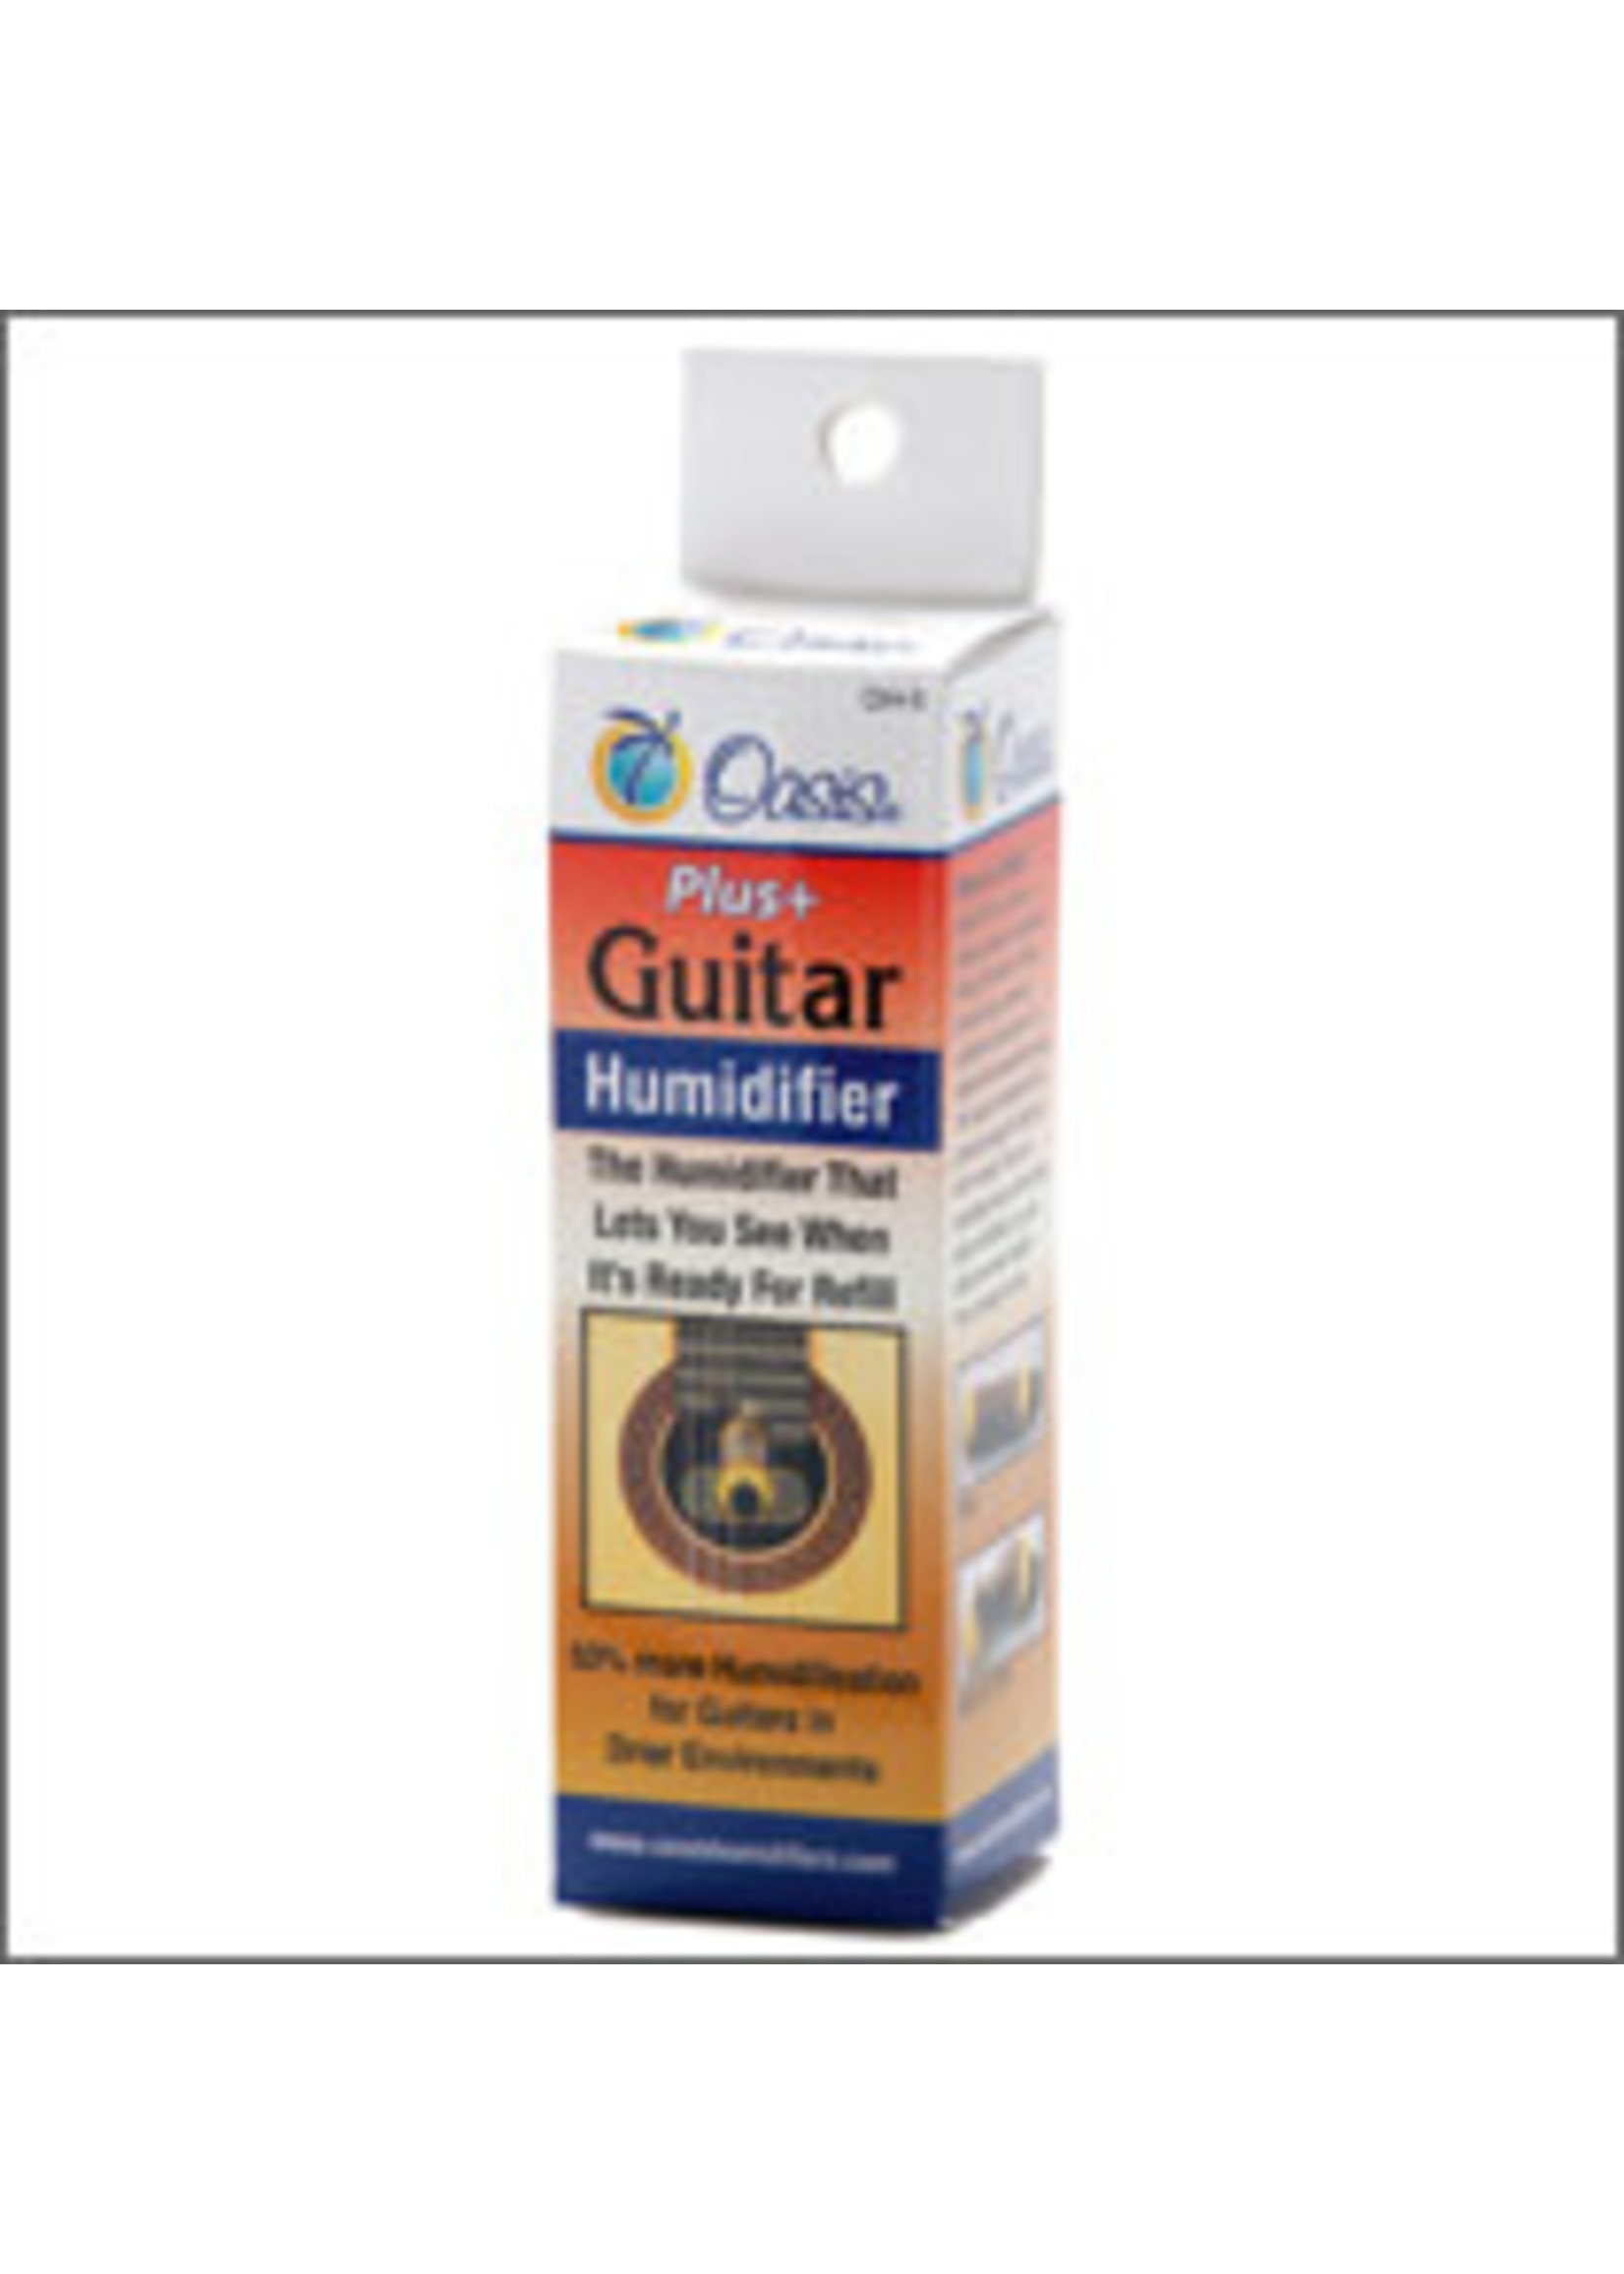 Oasis Oasis Humidifier Guitar Plus+ OH-5